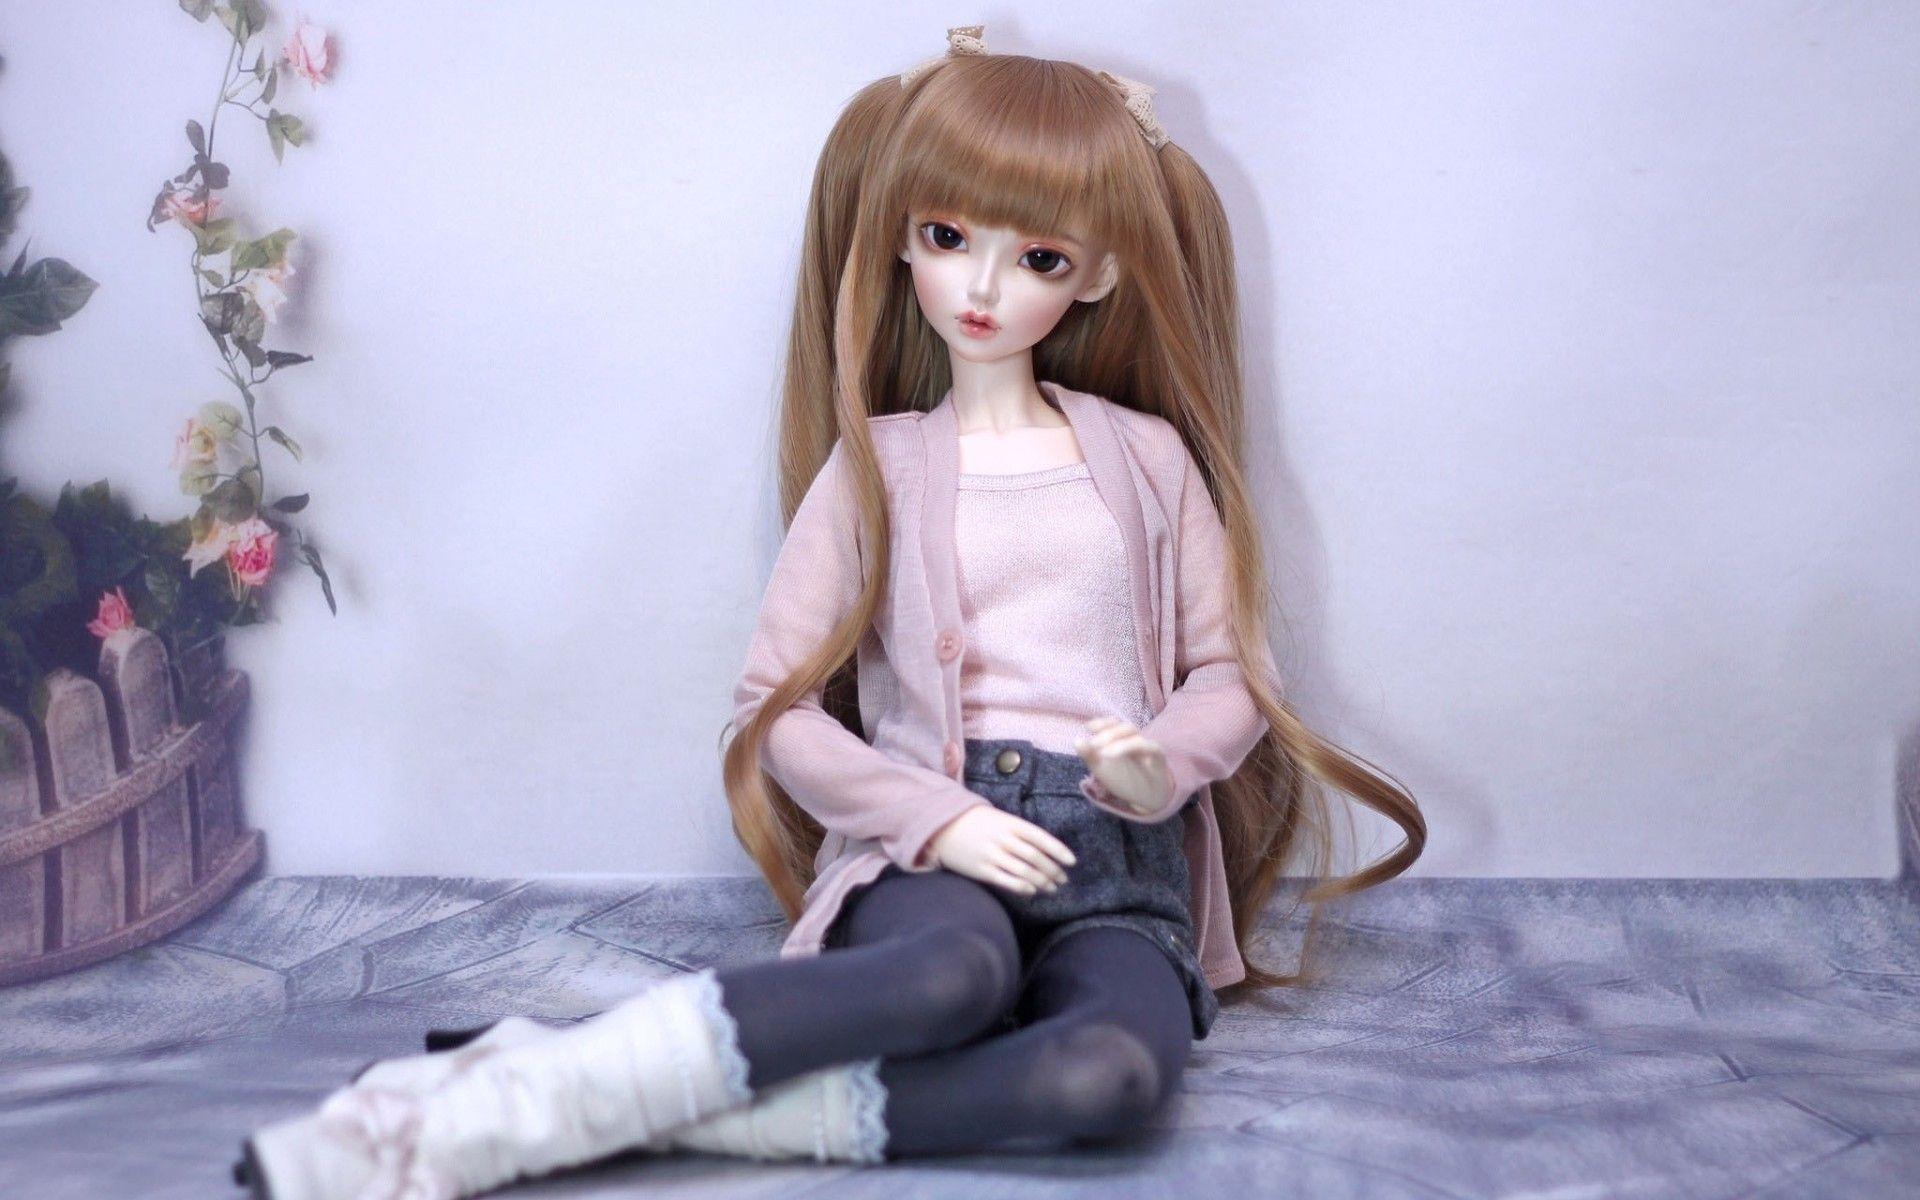 Barbie Doll Waitting For SomeOne HD Picture. file